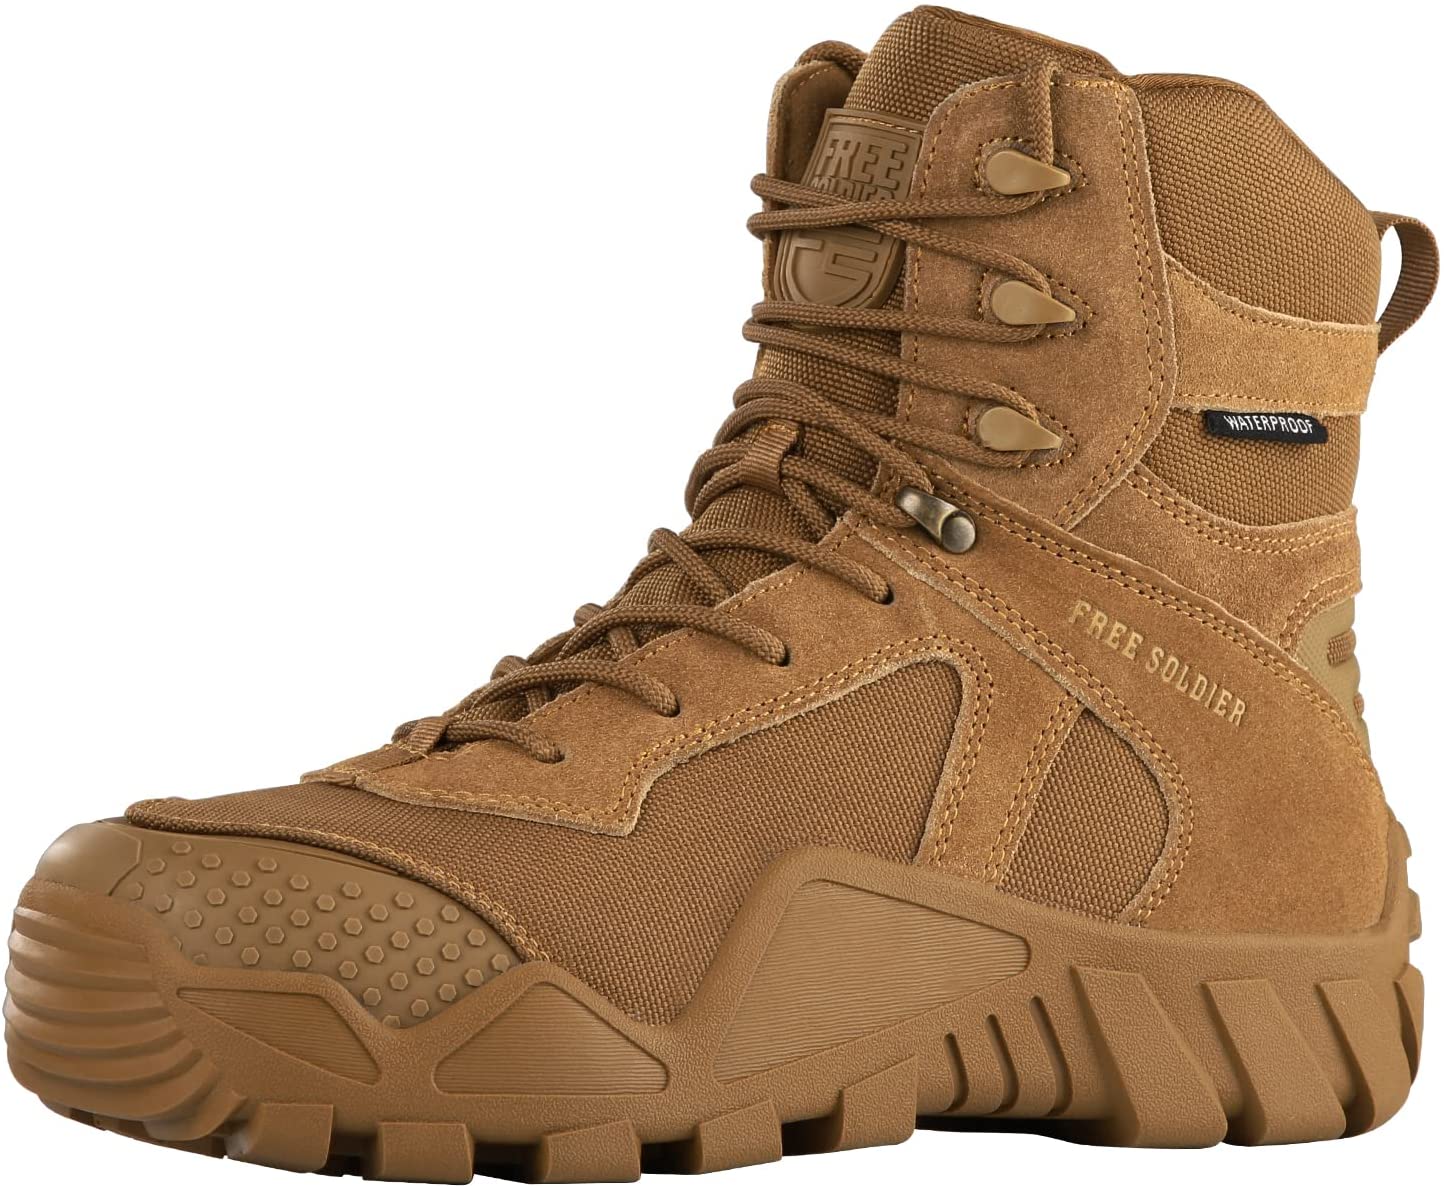 Boot review of  Free Soldier Waterproof Tactical Boot #boots #bo